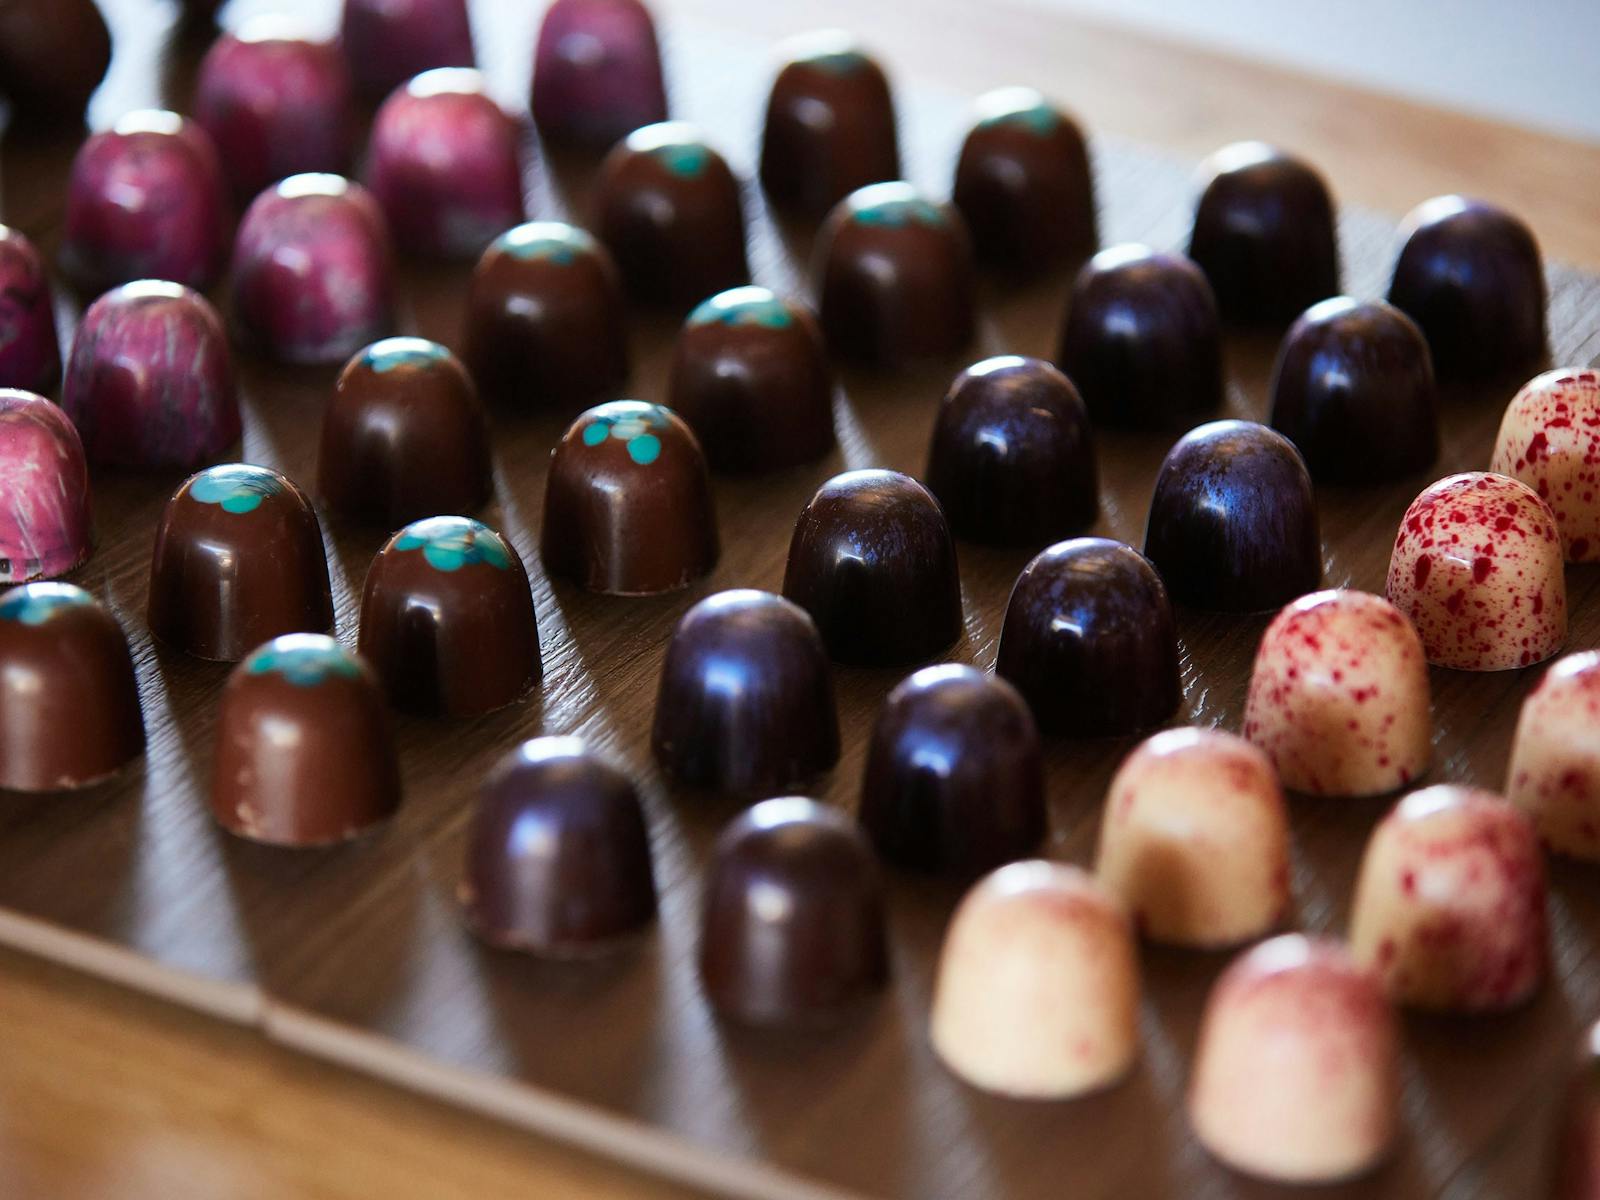 A tray of colourful chocolates